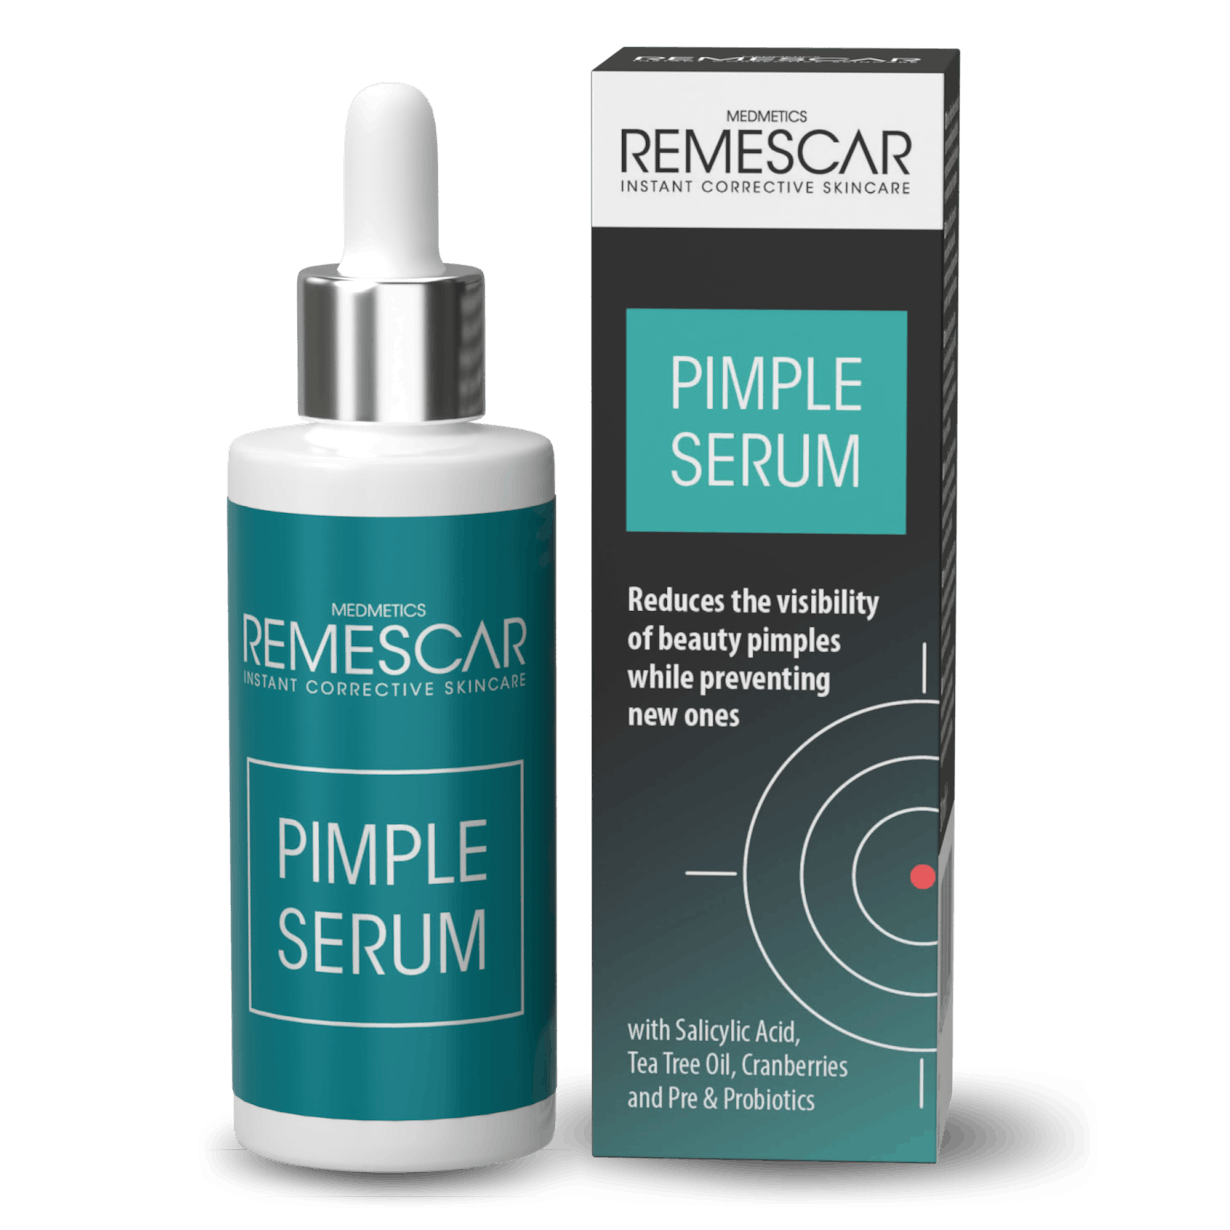 Remescar pdp pictures website and amazon 2000x2000px pimple serum